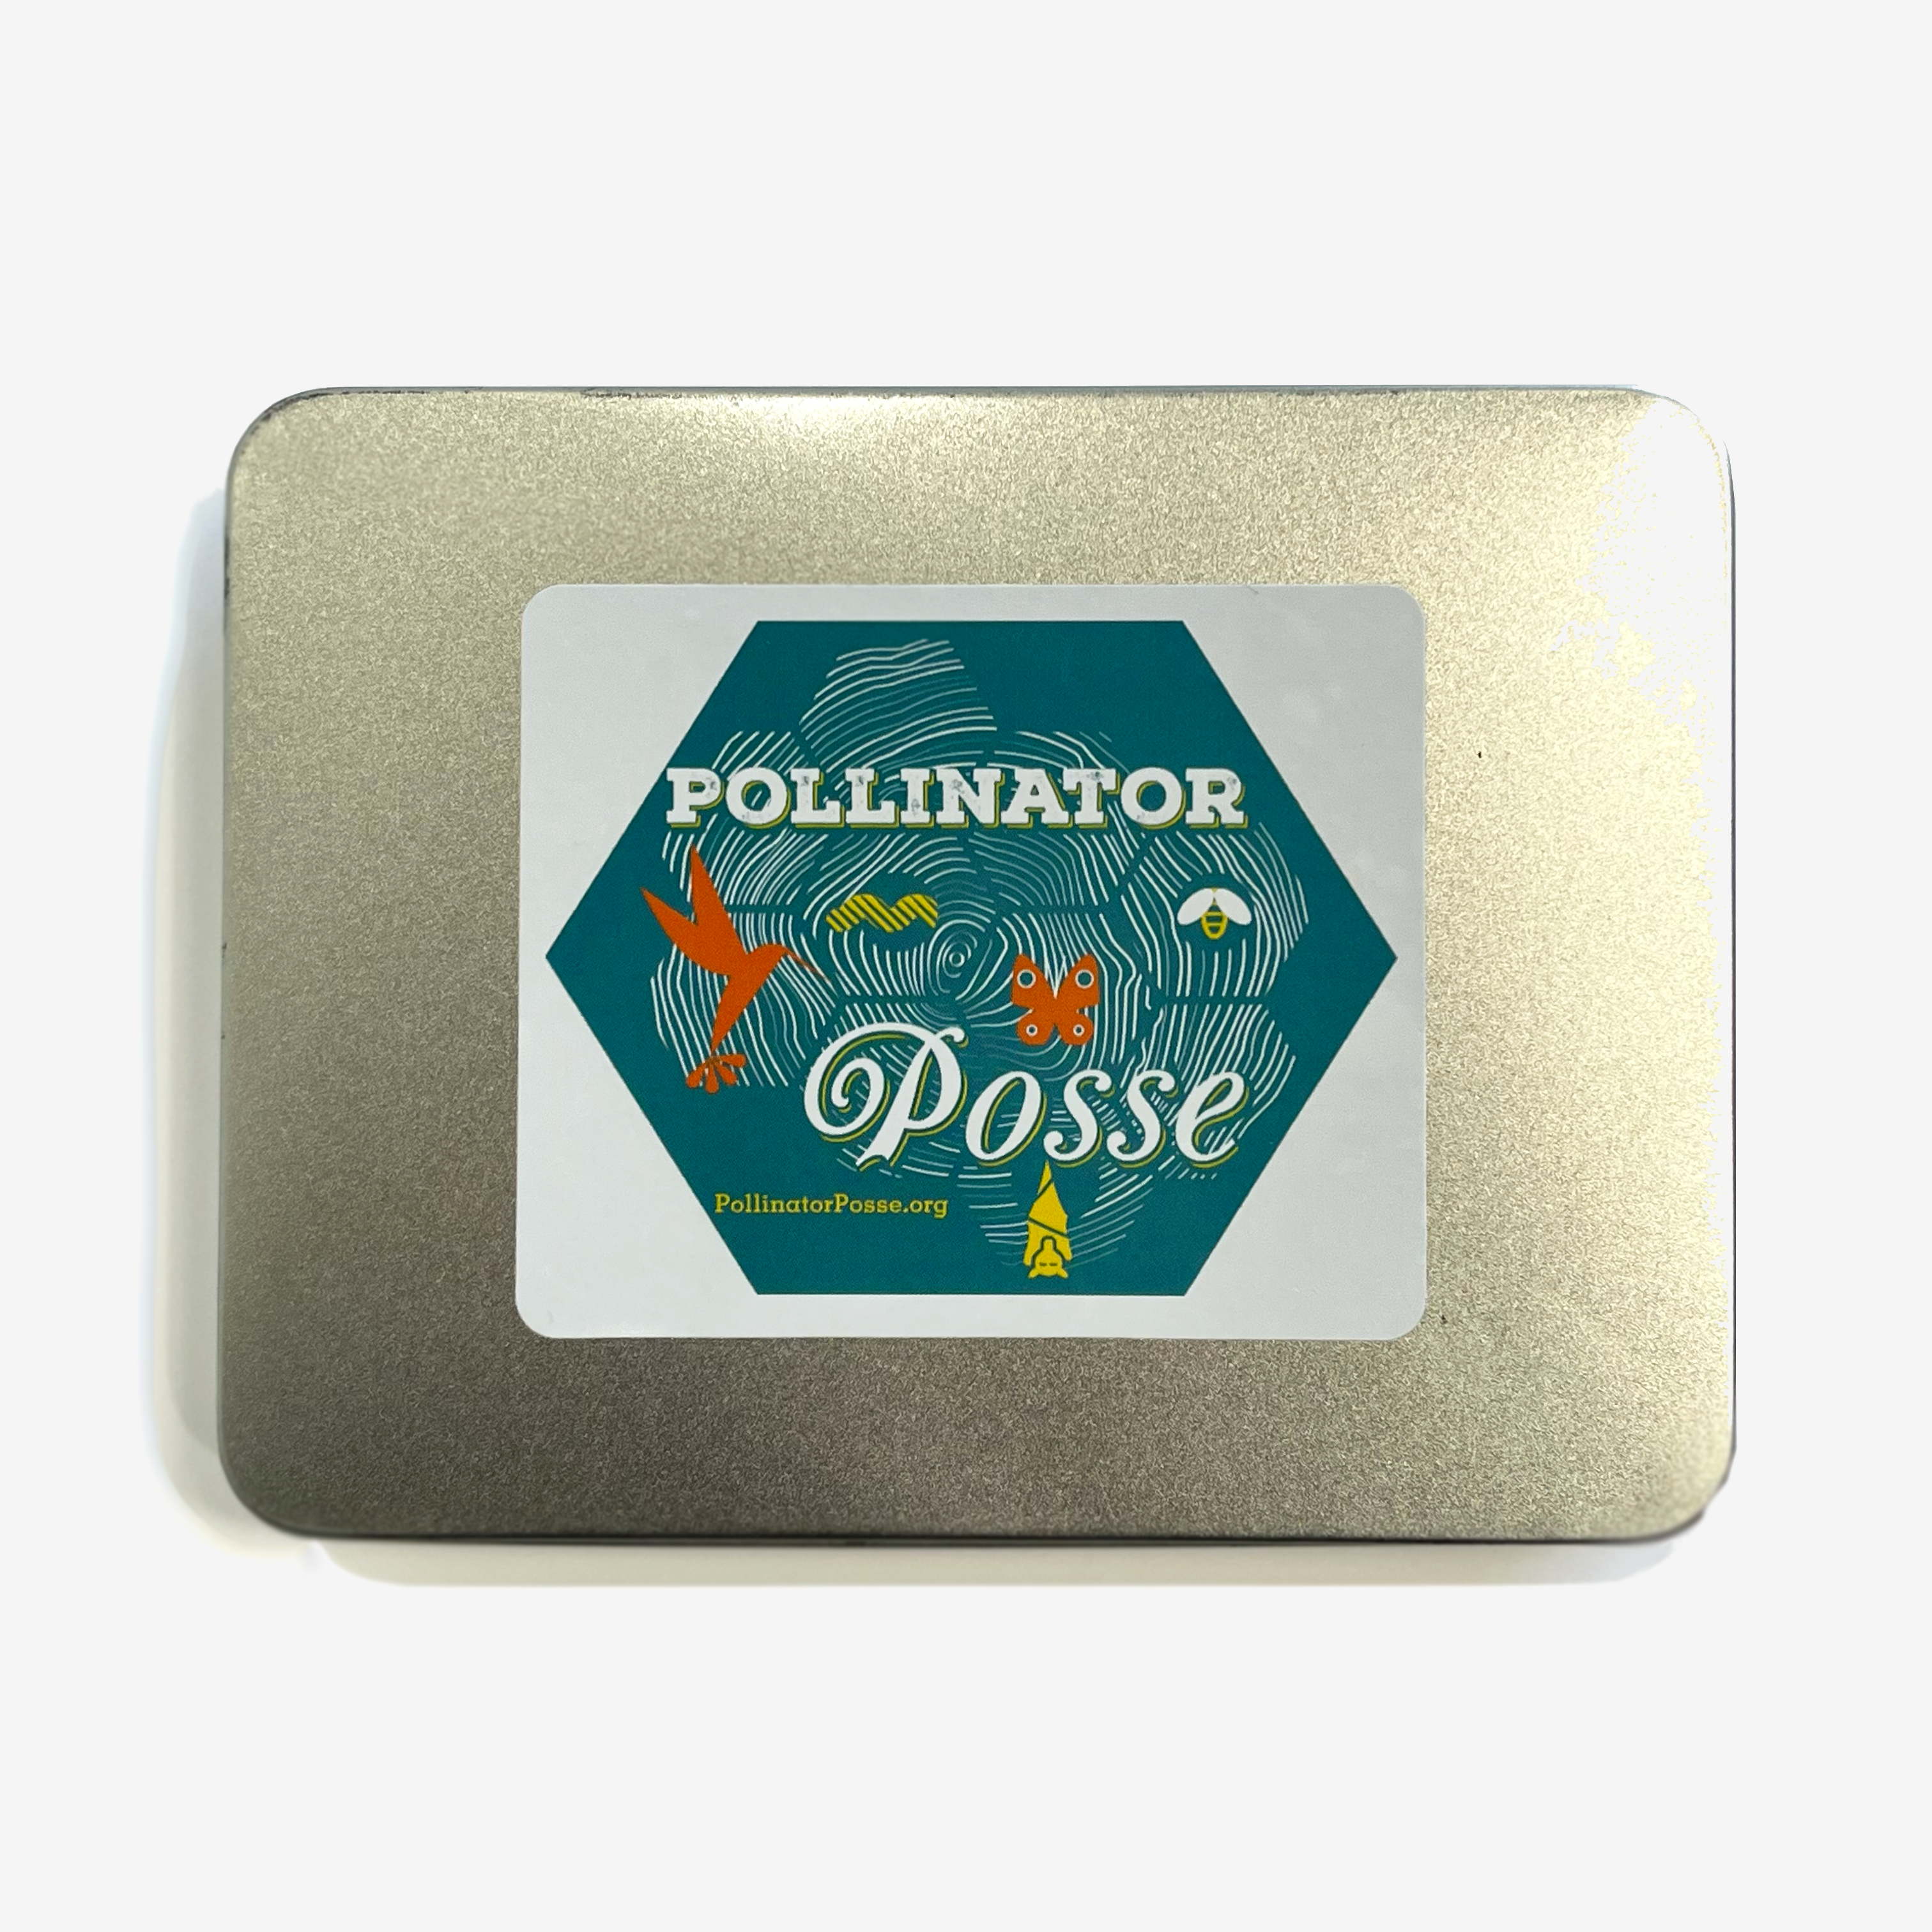 Top view of Pollinator Posse Seed Kit in metal box with a sticker label on the front.